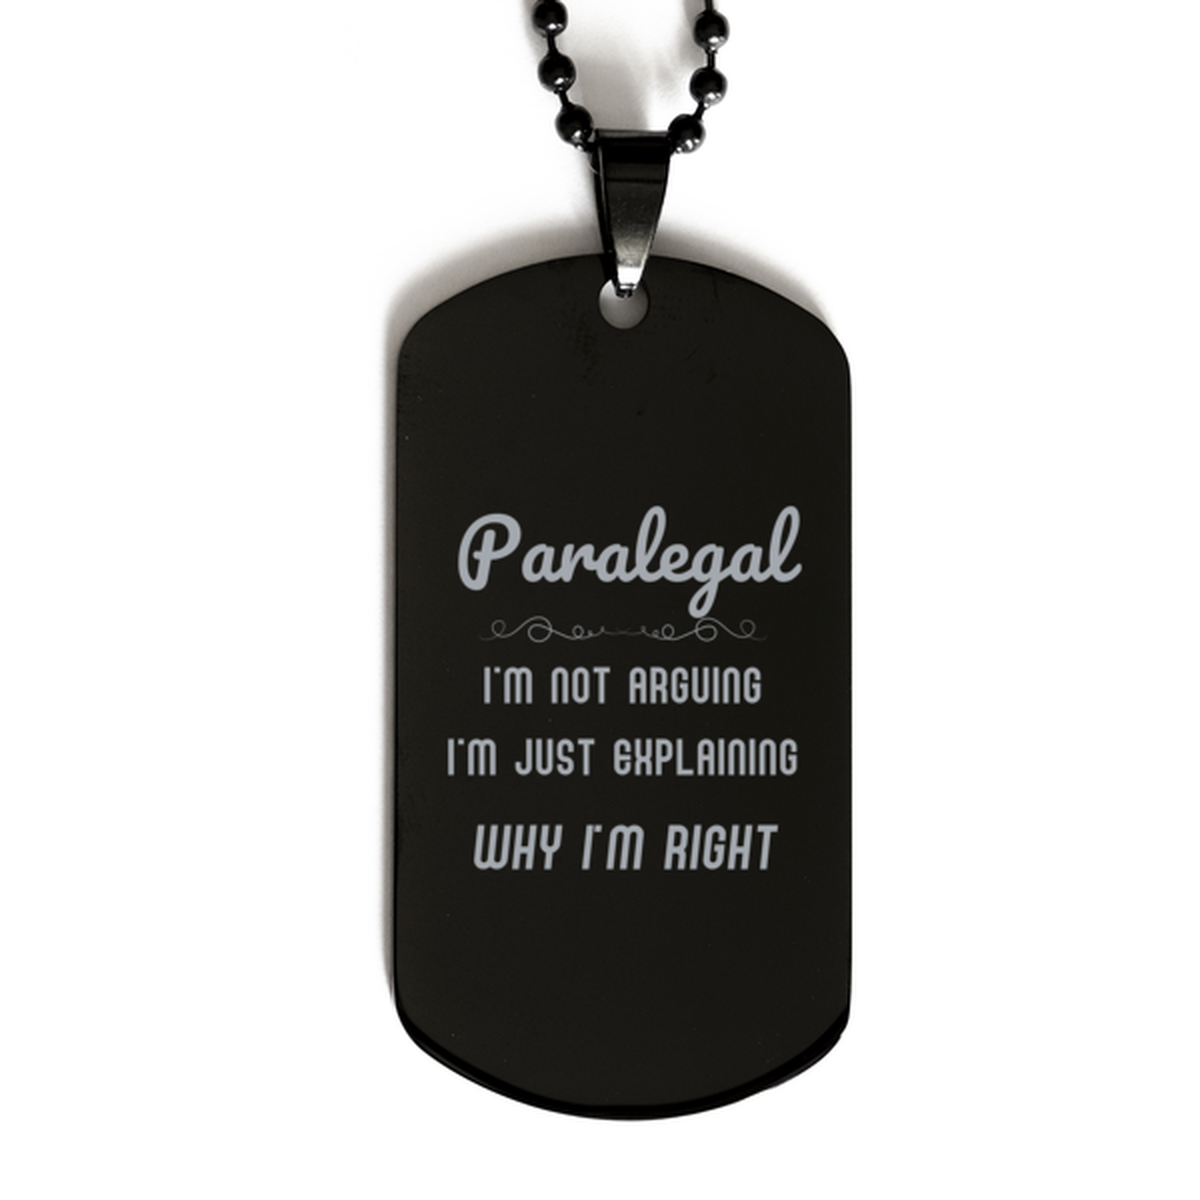 Paralegal I'm not Arguing. I'm Just Explaining Why I'm RIGHT Black Dog Tag, Funny Saying Quote Paralegal Gifts For Paralegal Graduation Birthday Christmas Gifts for Men Women Coworker